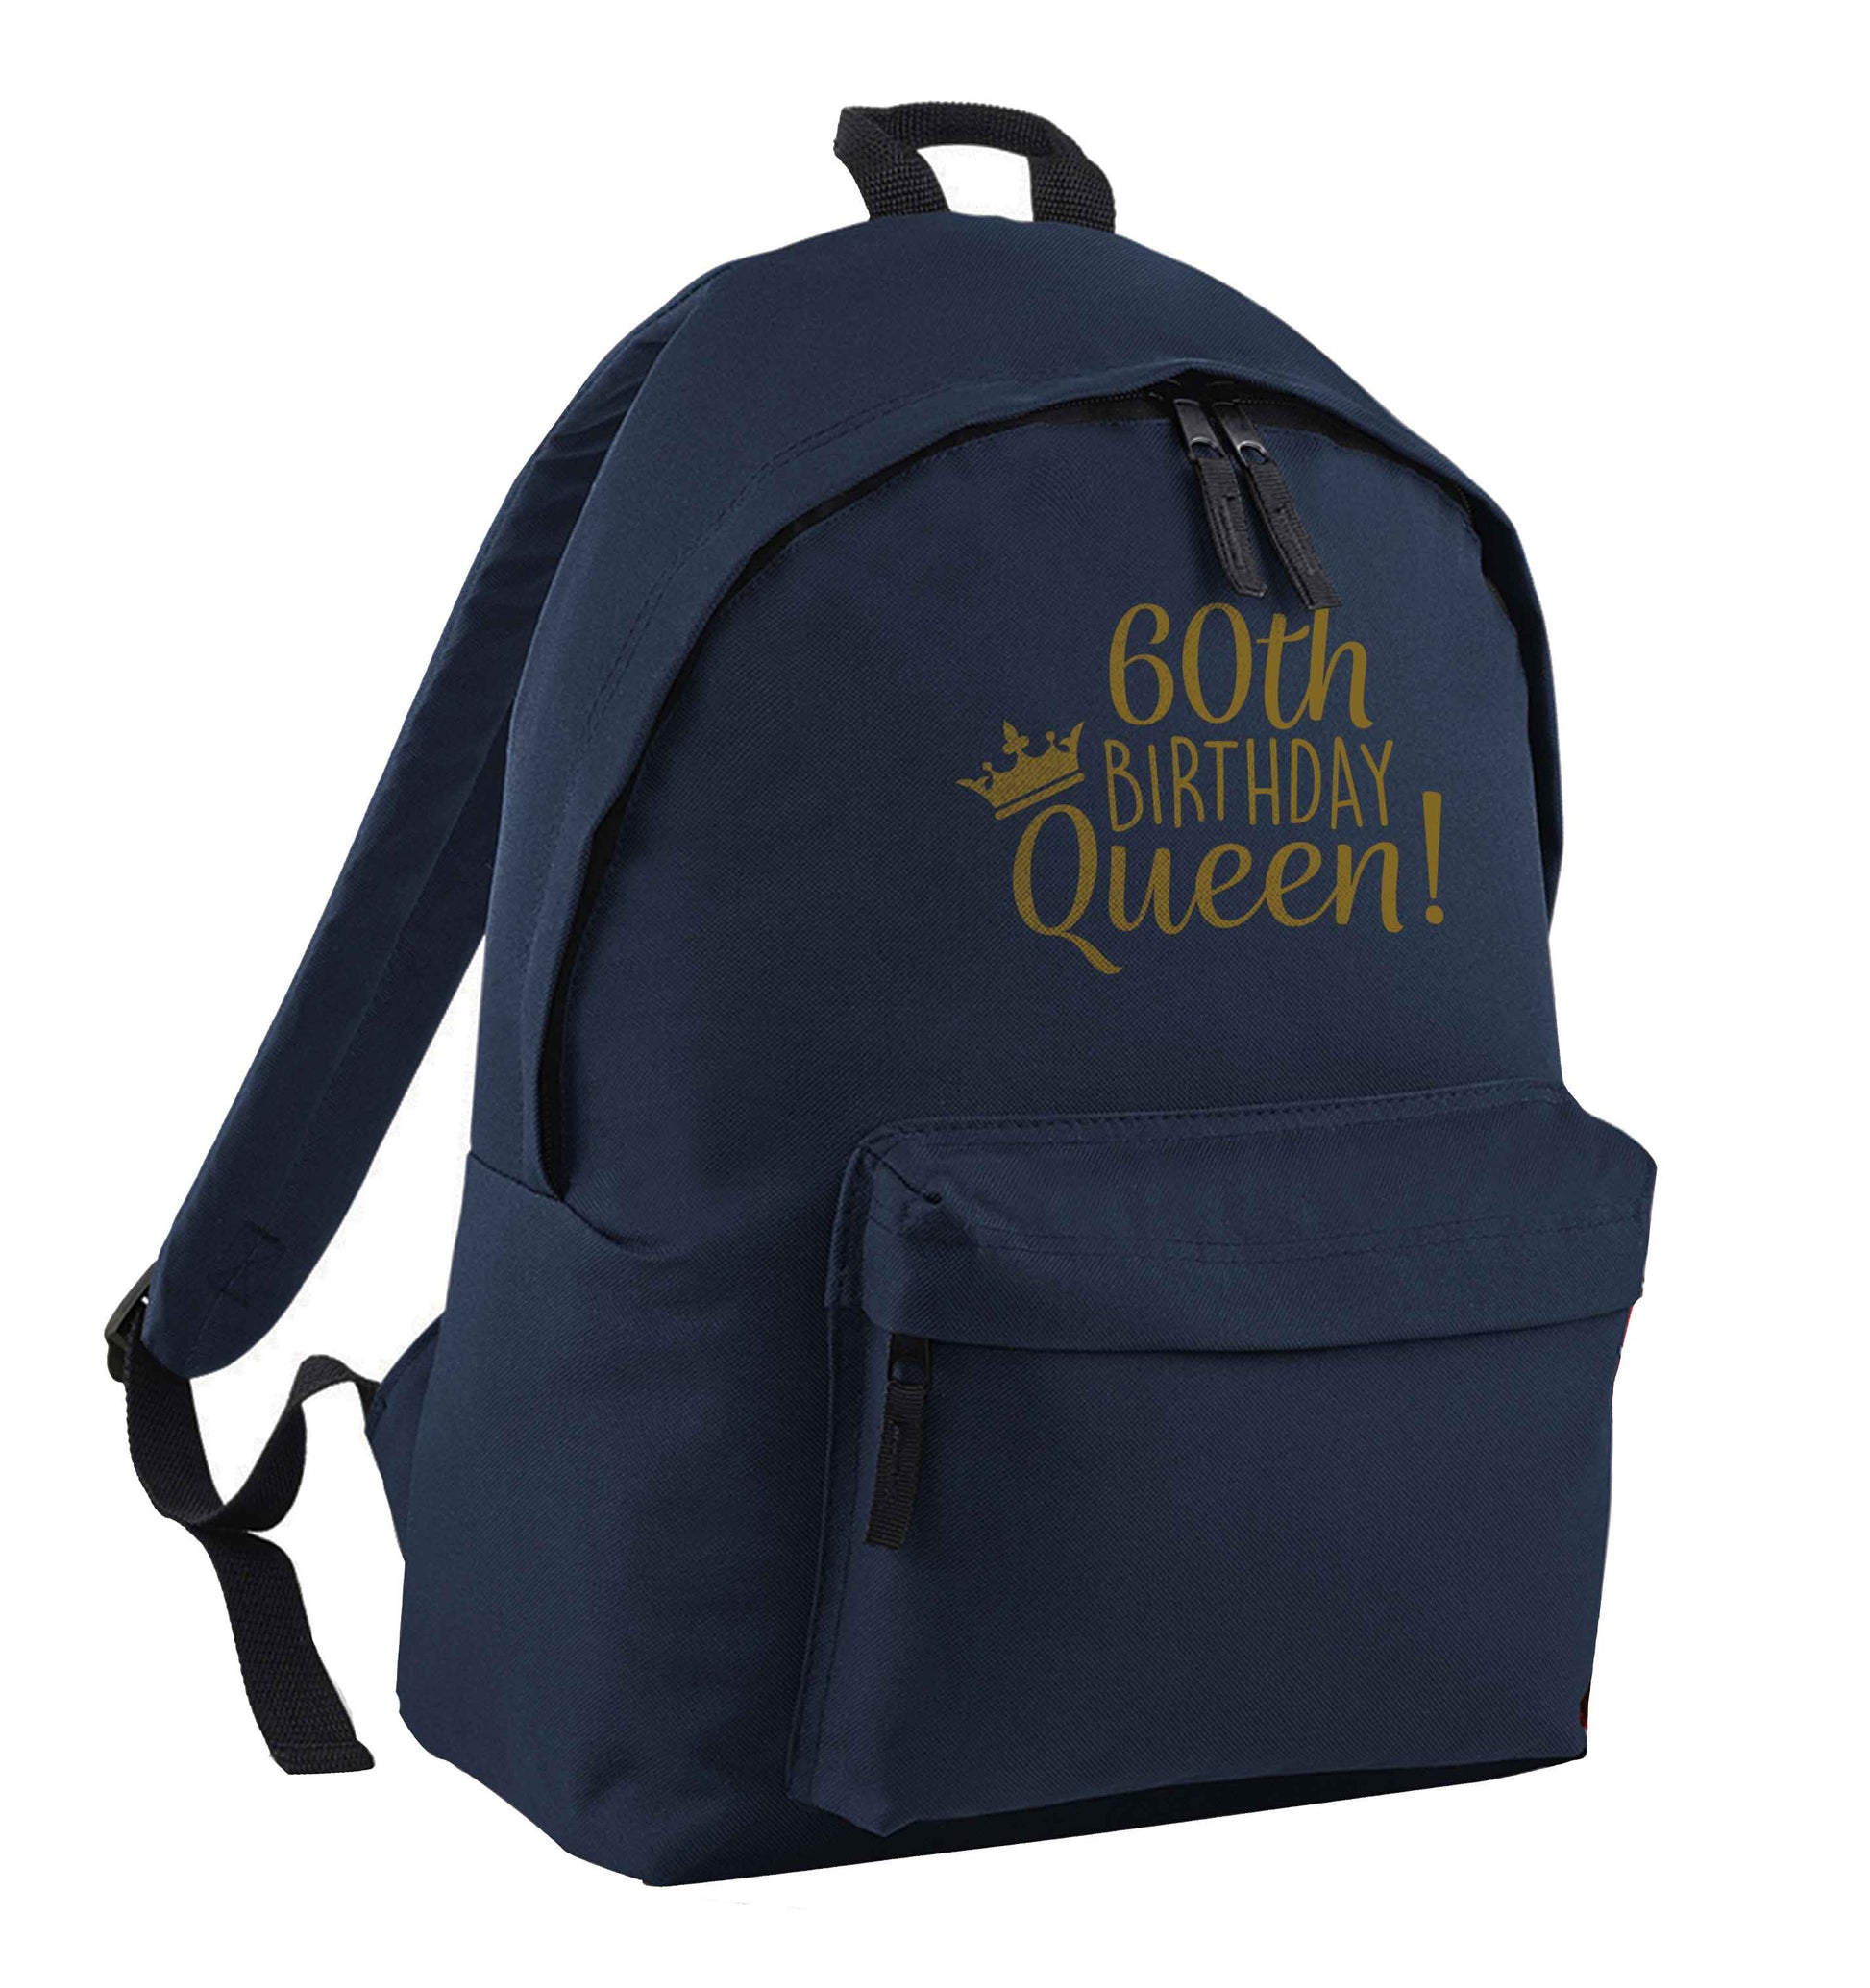 60th birthday Queen navy adults backpack